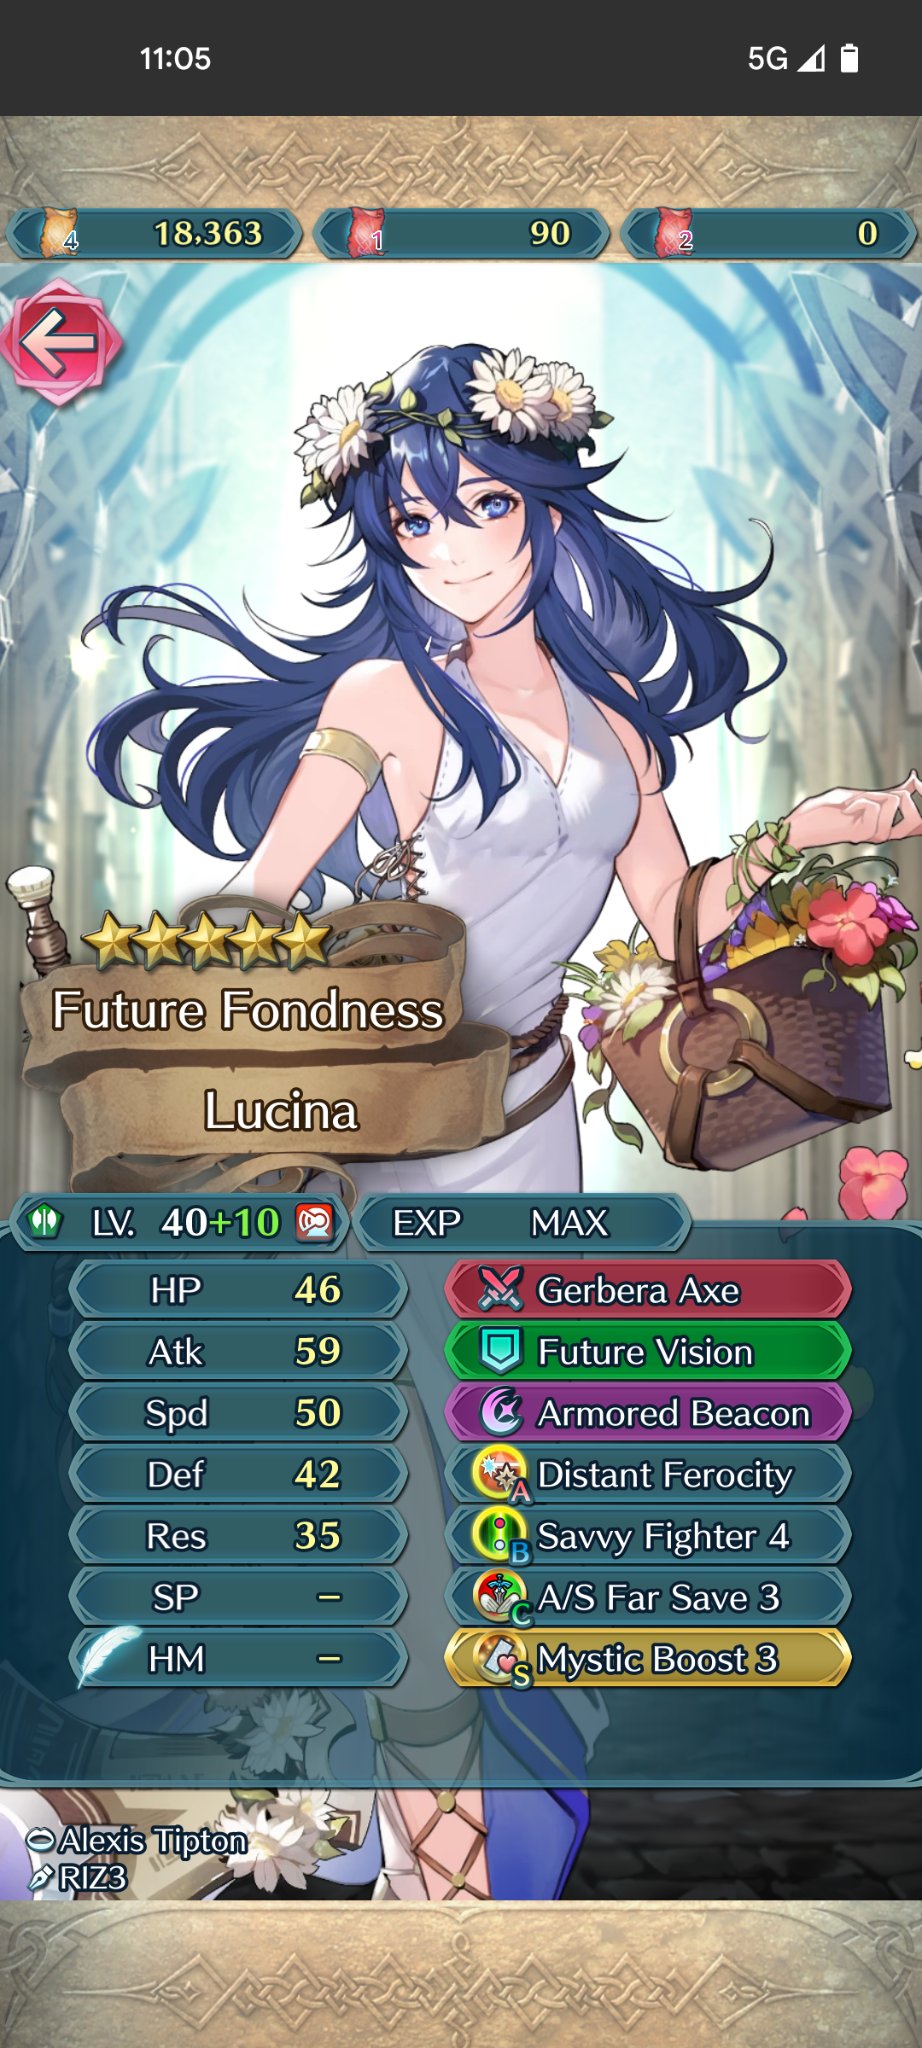 DTM on X: Final HoF for V!Lucina. Rip no Distant Dart or A/S